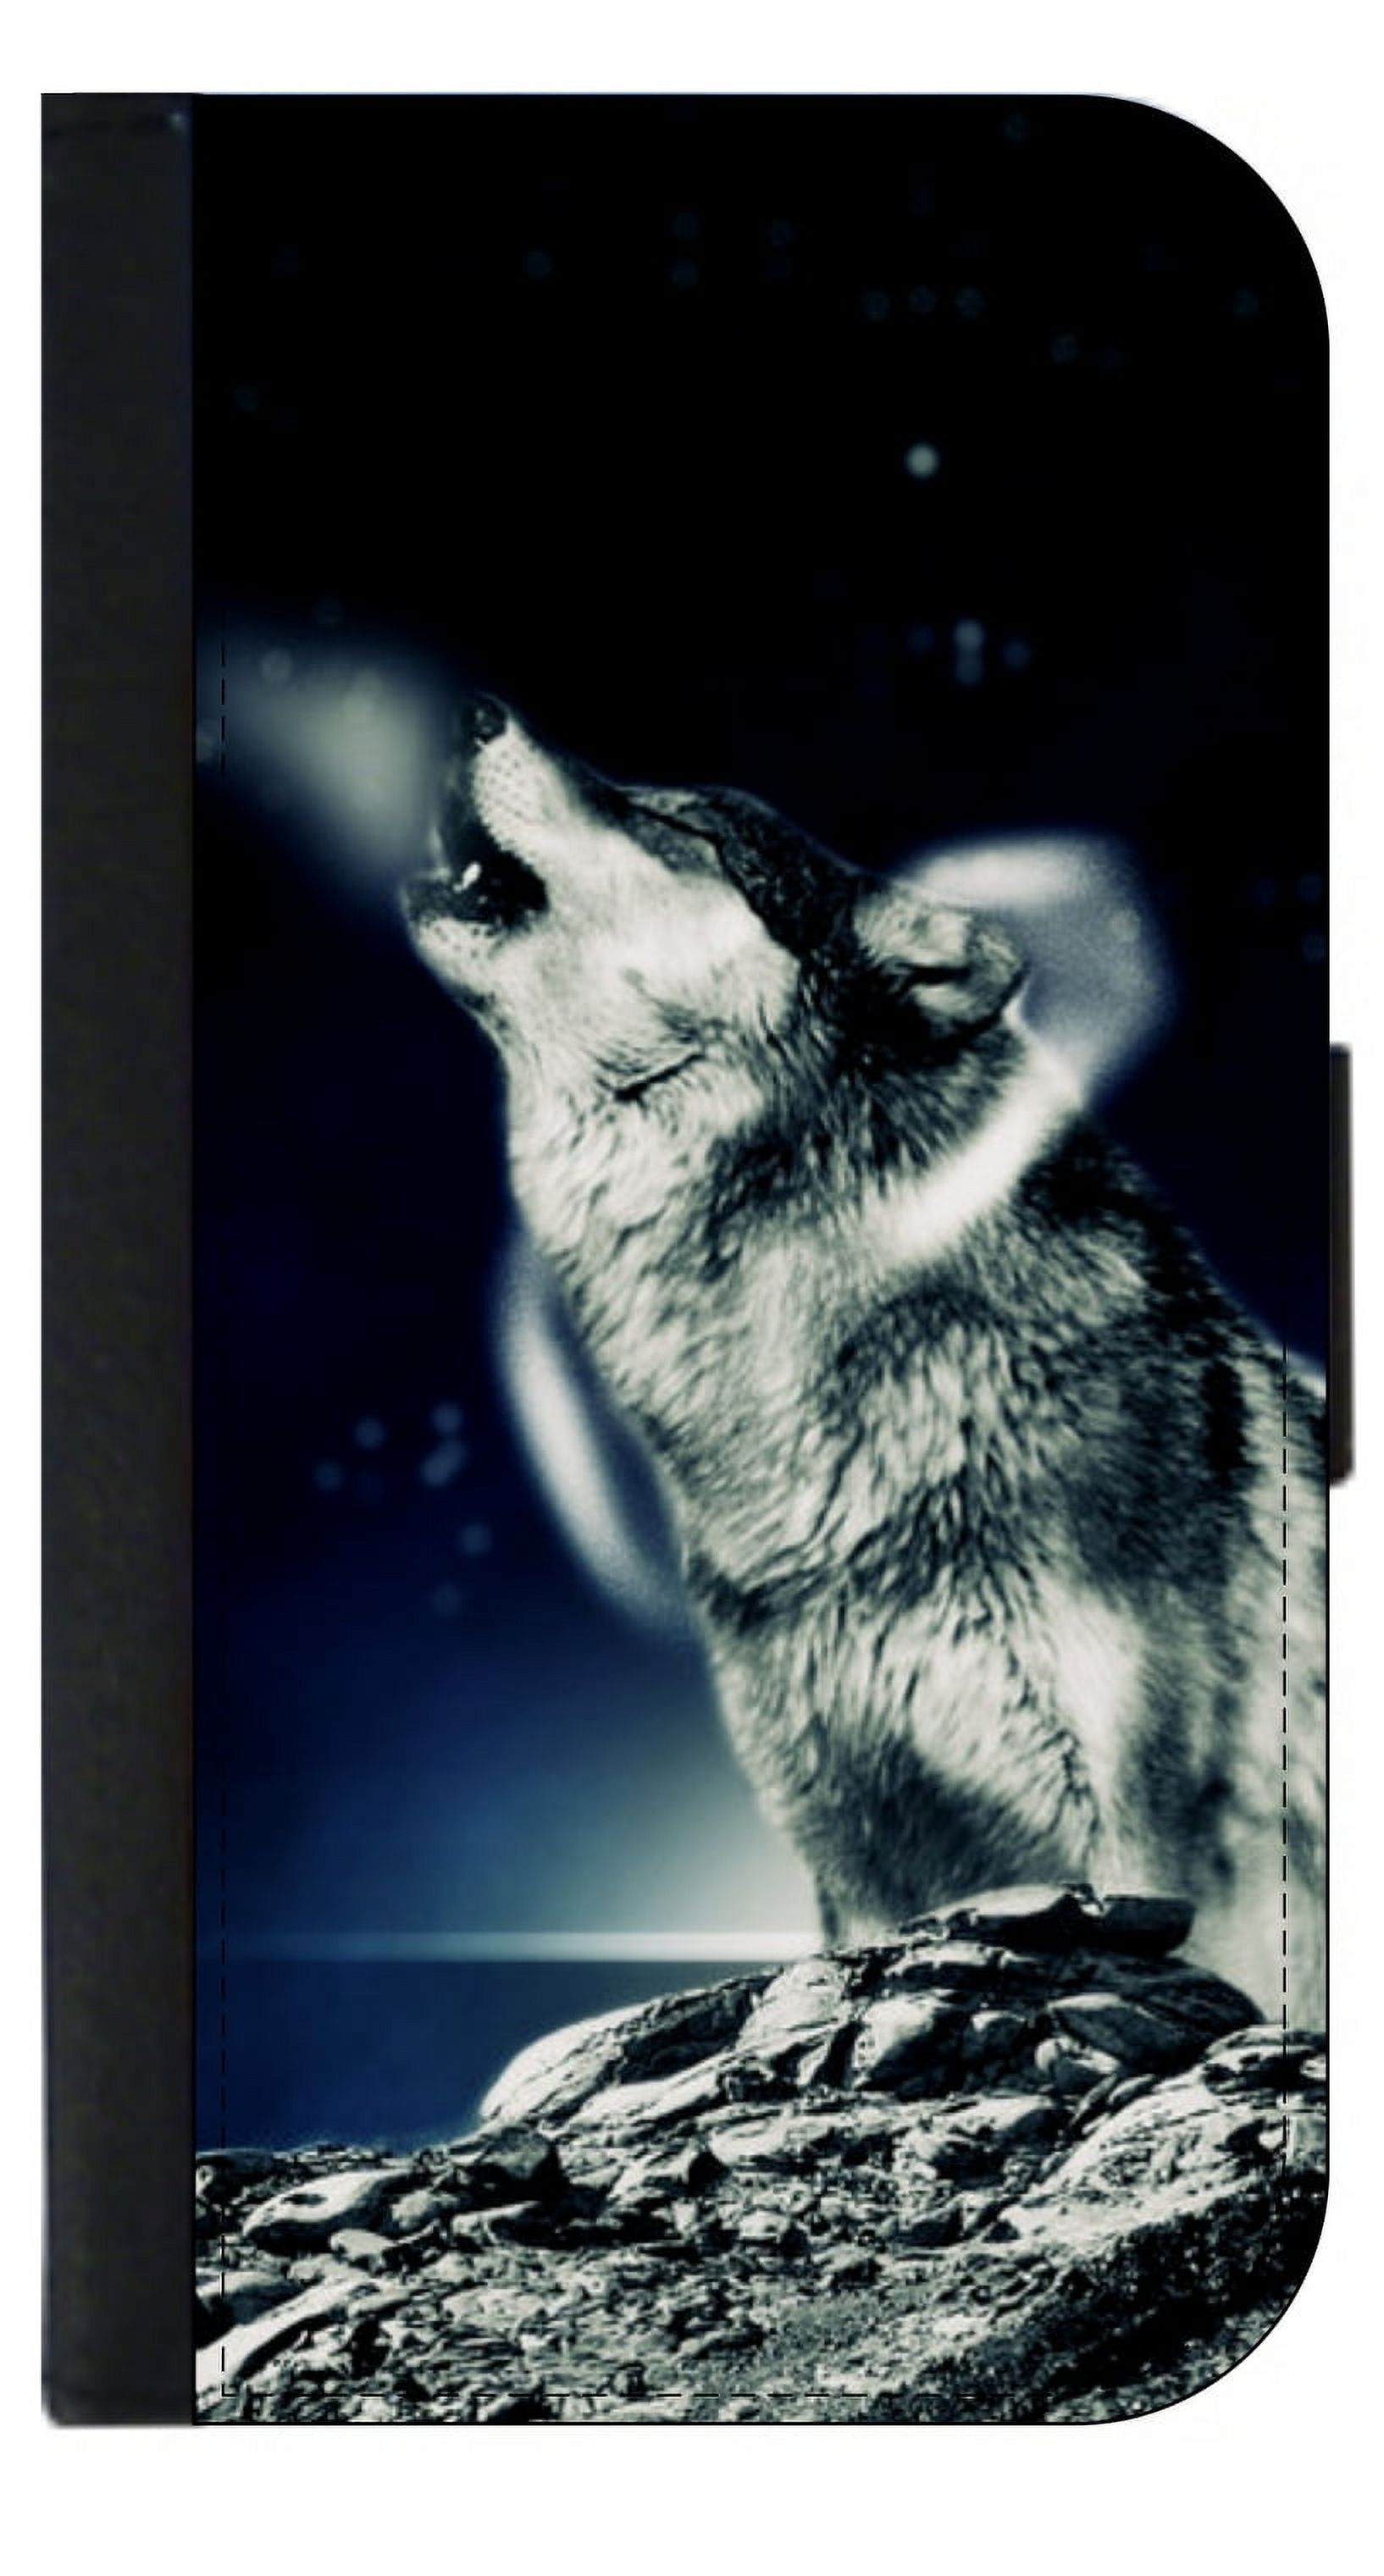 Howling Wolf Wallet Style Cell Phone Case with 2 Card Slots and a Flip Cover Compatible with the Apple iPhone 4 and 4s Universal - image 1 of 4